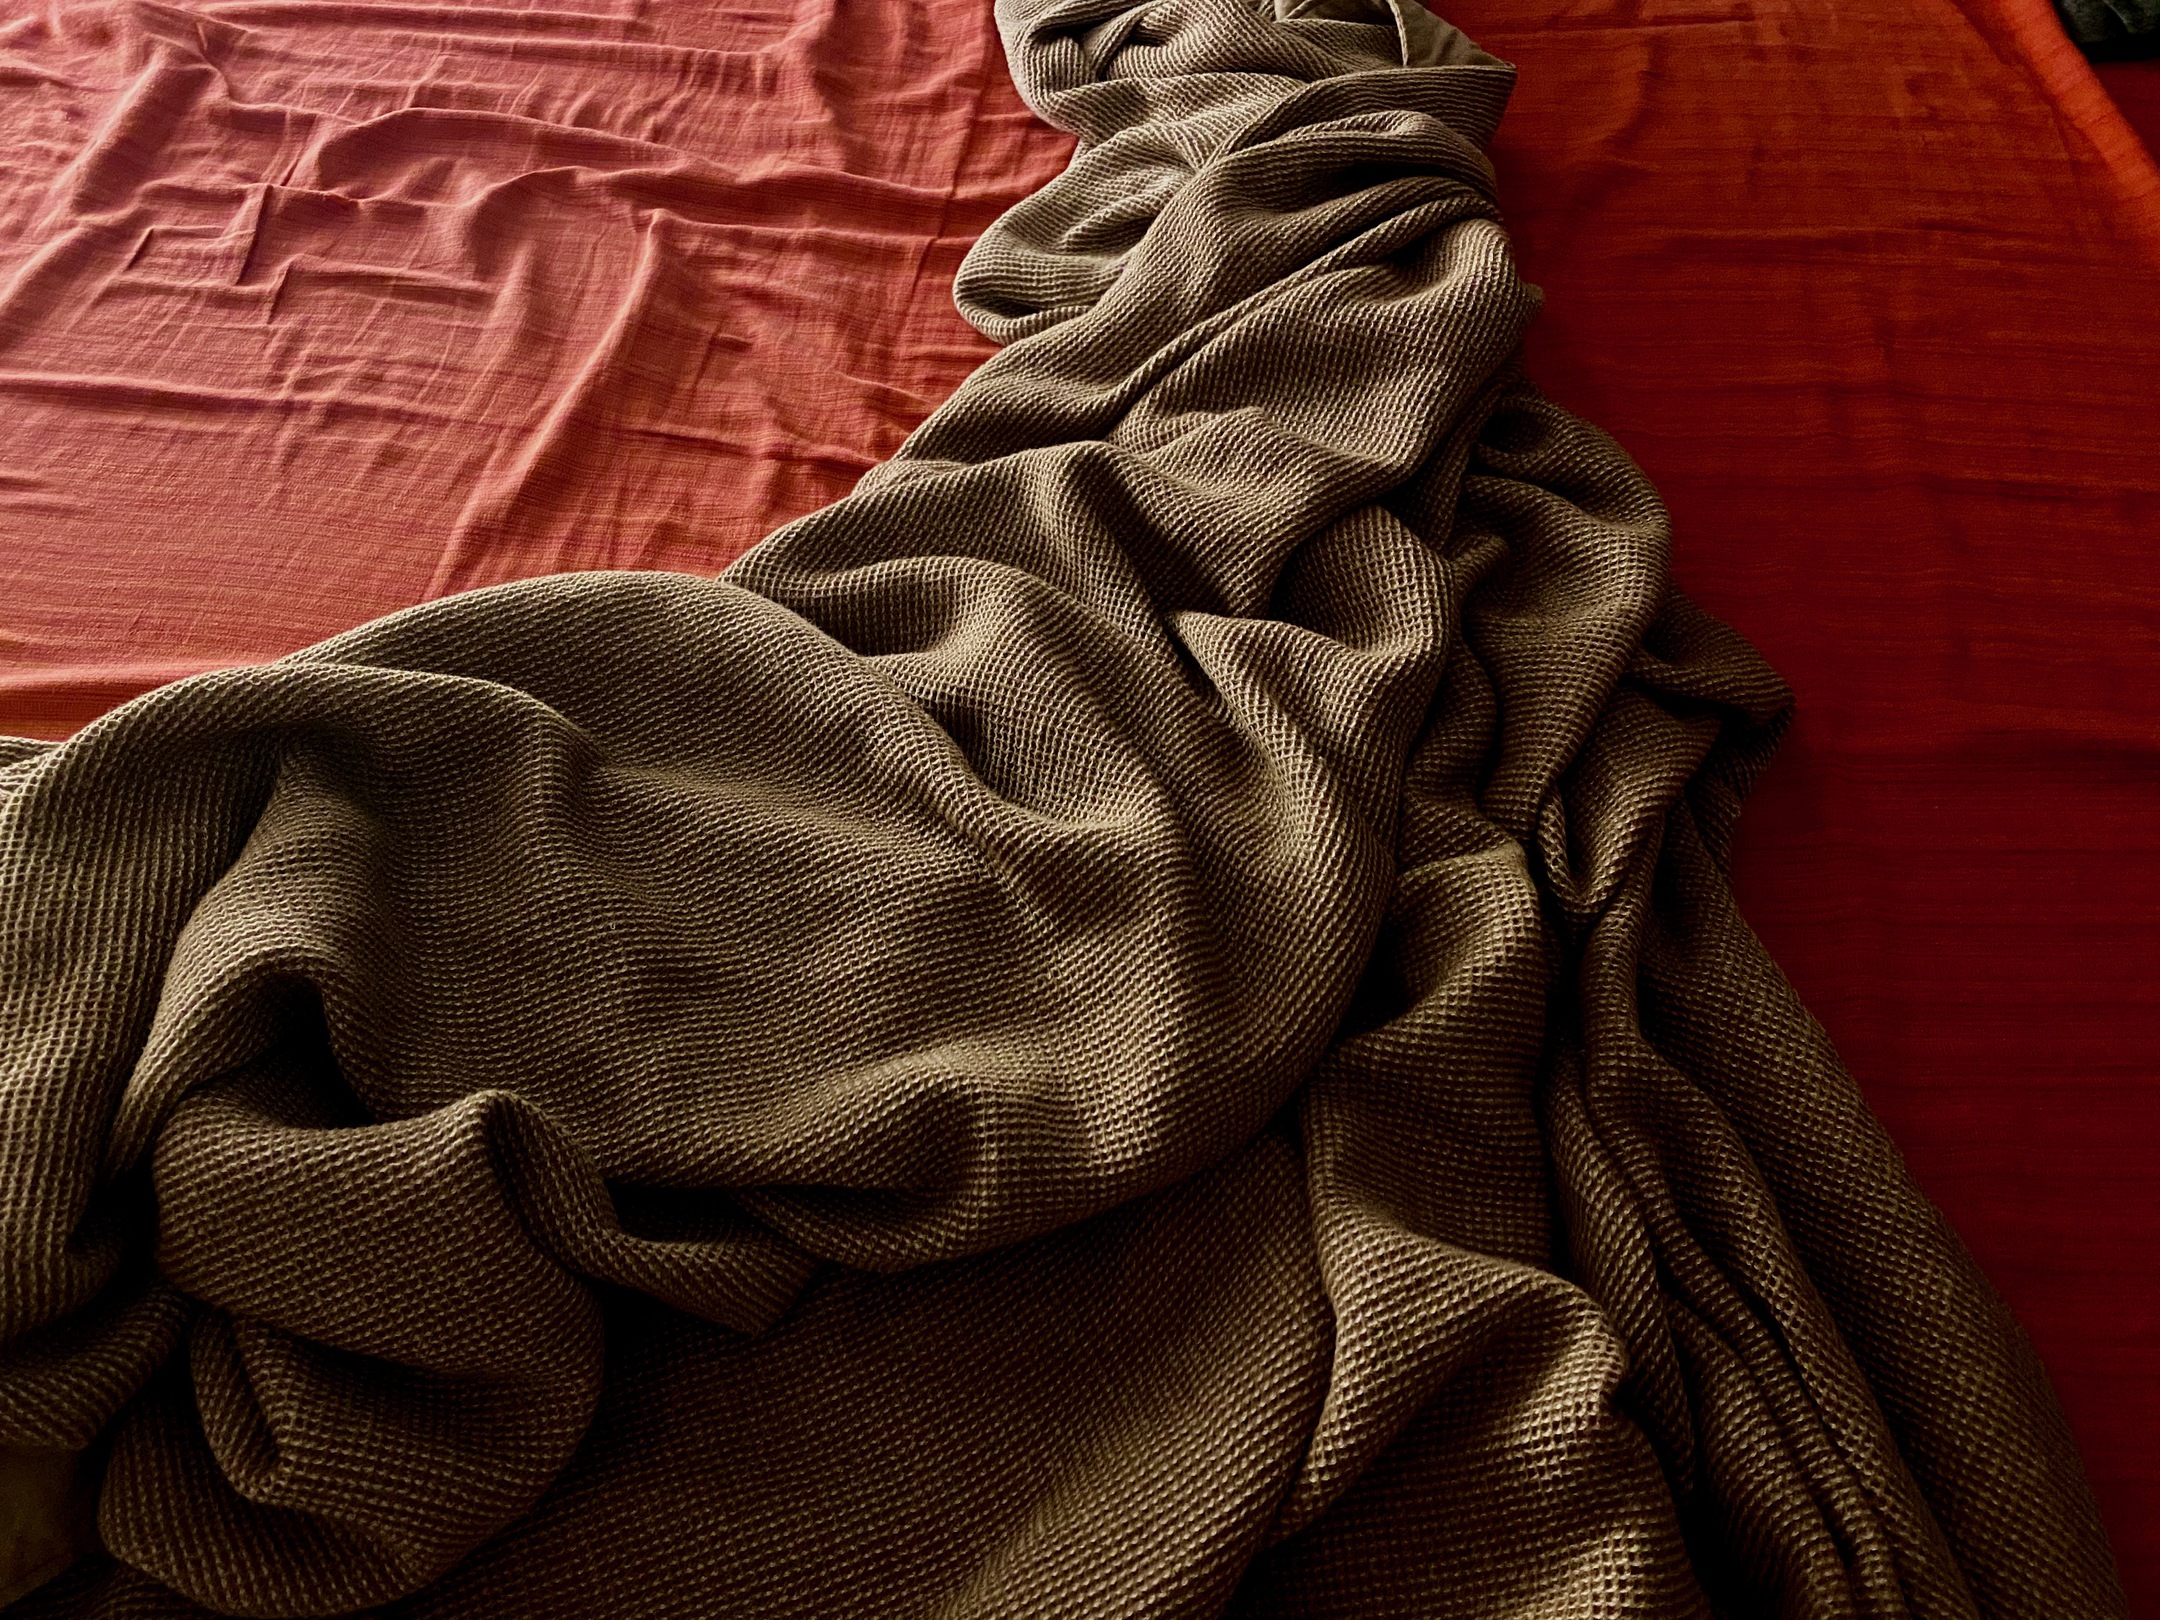 An earthen blanket with pitted texture thrown on a bed with a brick colored bedspread.